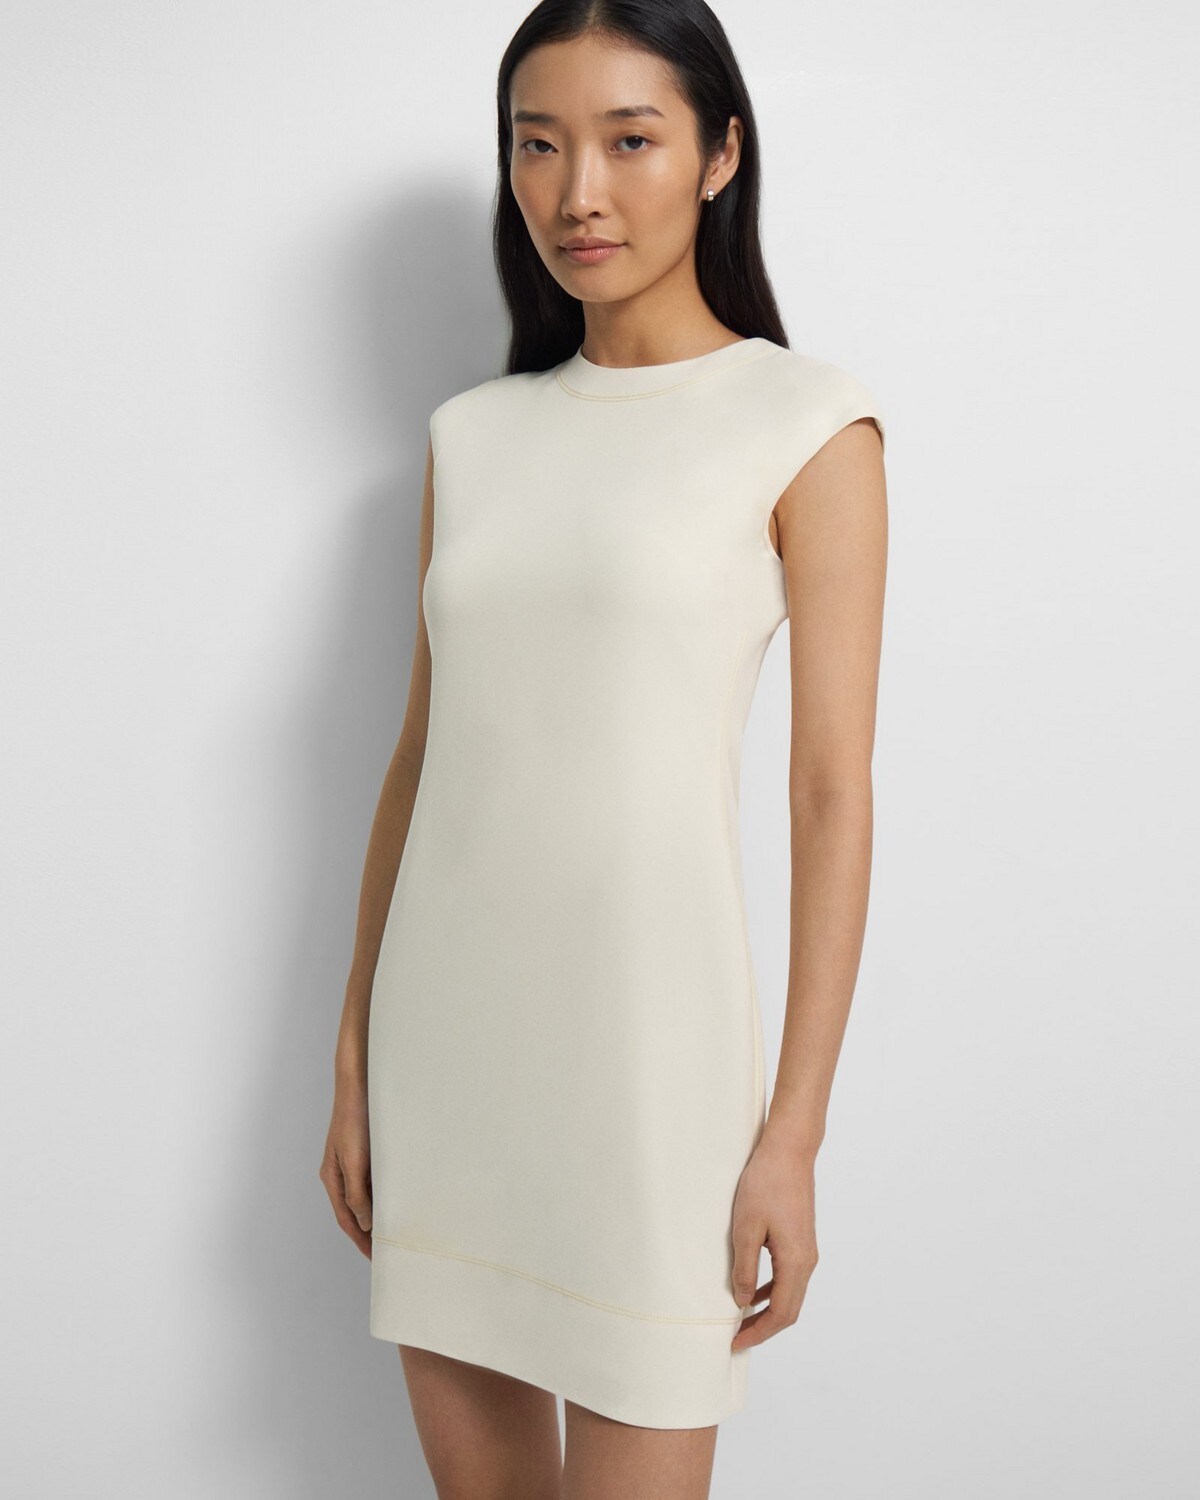 Embroidered Shift Dress in Admiral Crepe